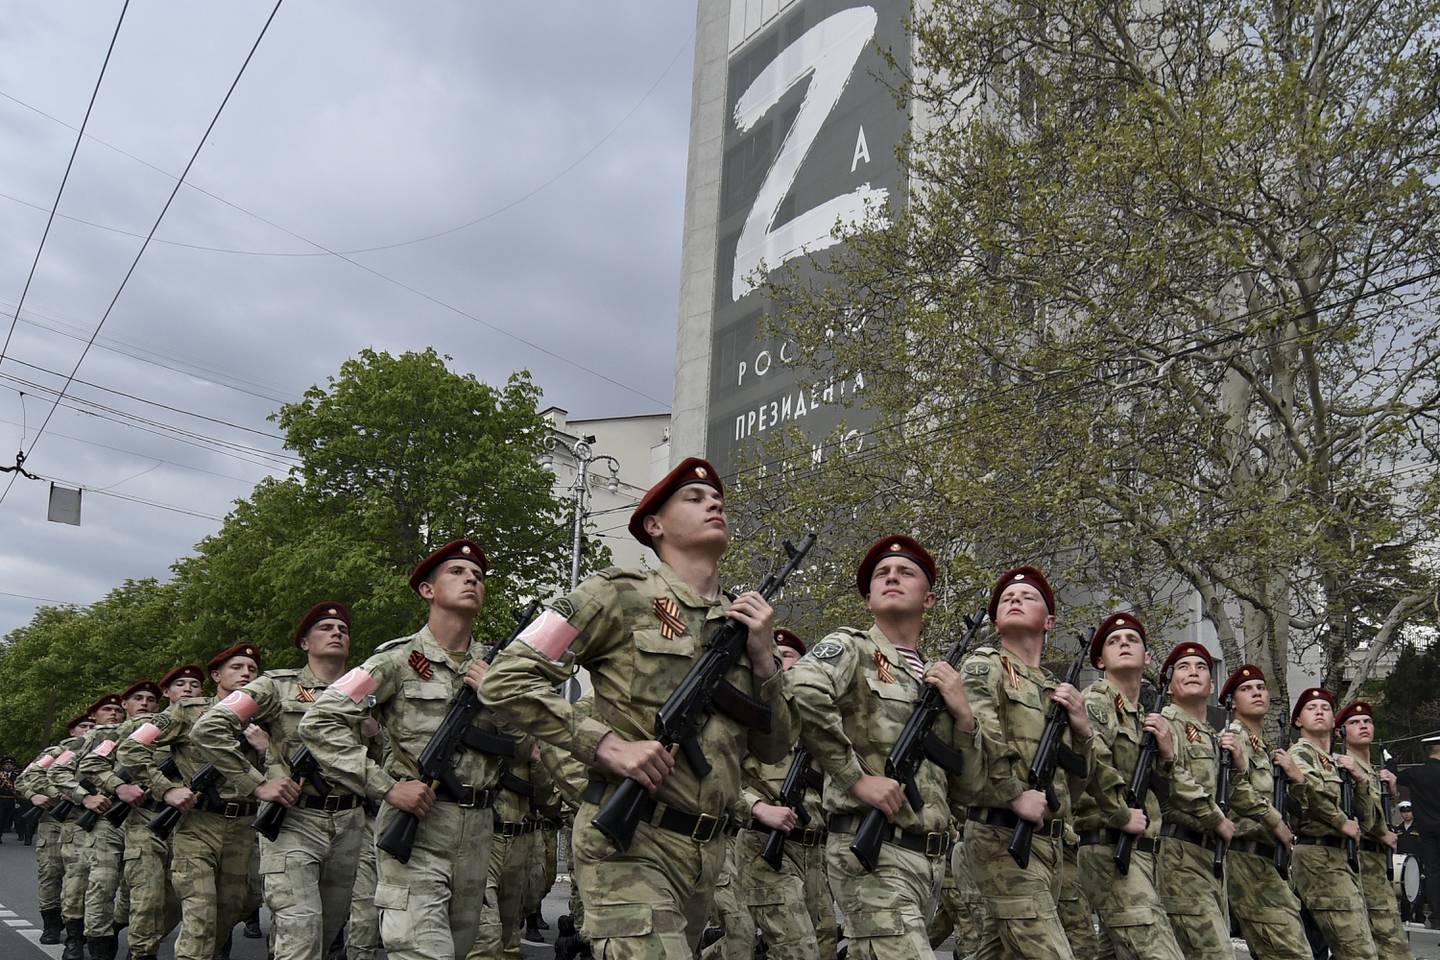 Russian National Guard (Rosguardia) servicemen march through a street with a letter Z, which has become a symbol of the Russian military on a building in Sevastopol, Crimea, Thursday, May 5, 2022.  (AP Photo)